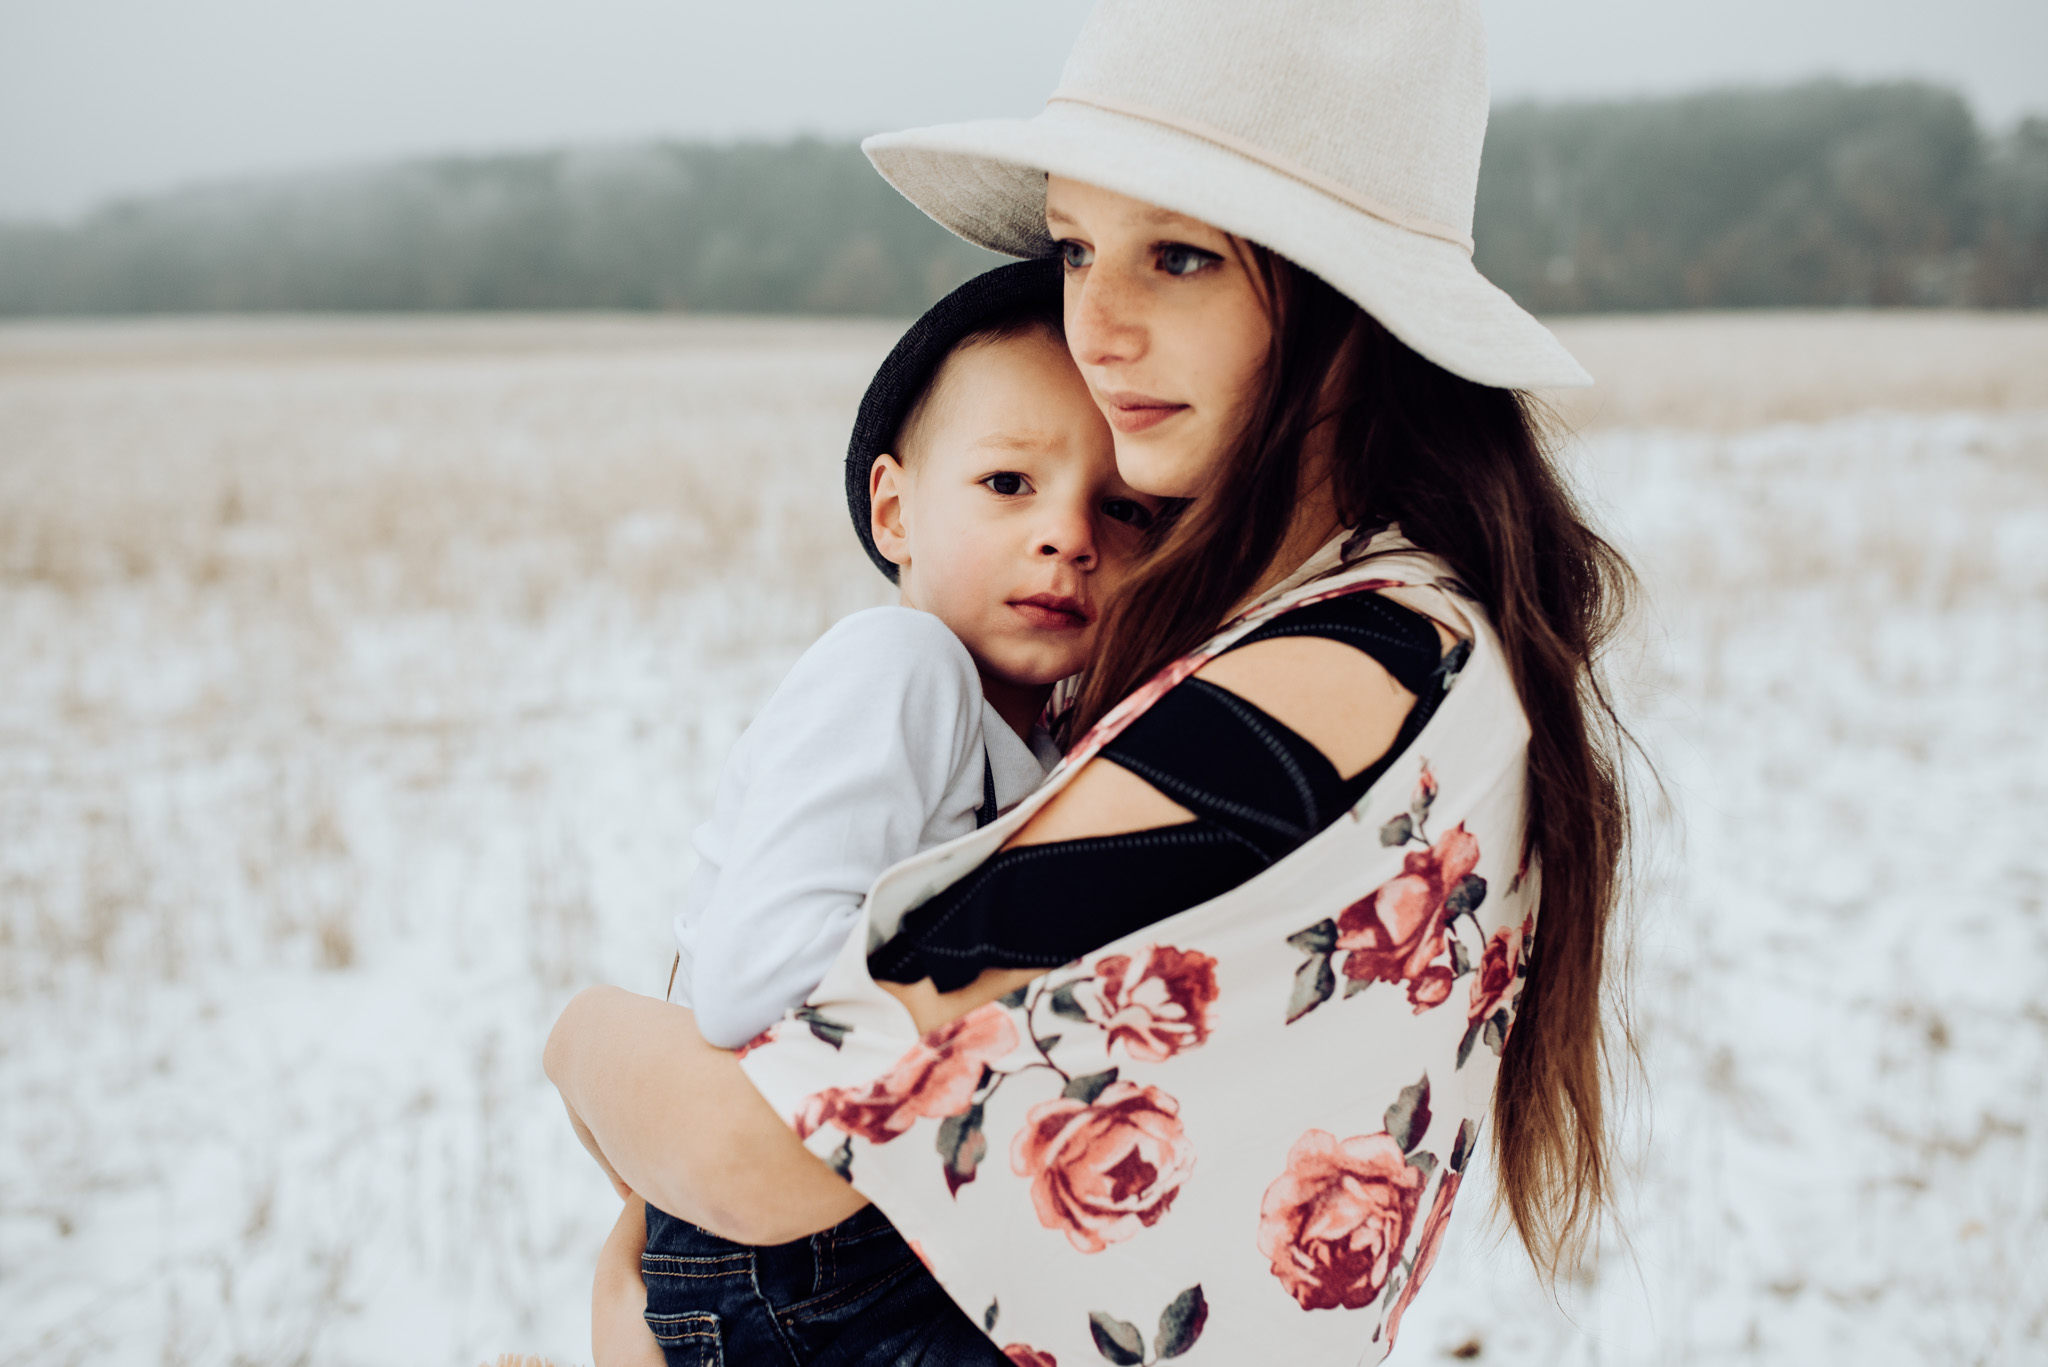 A girl carries her young brother in a snowy meadow during their family photos in the snow. She is wearing a white hat and a floral dress.